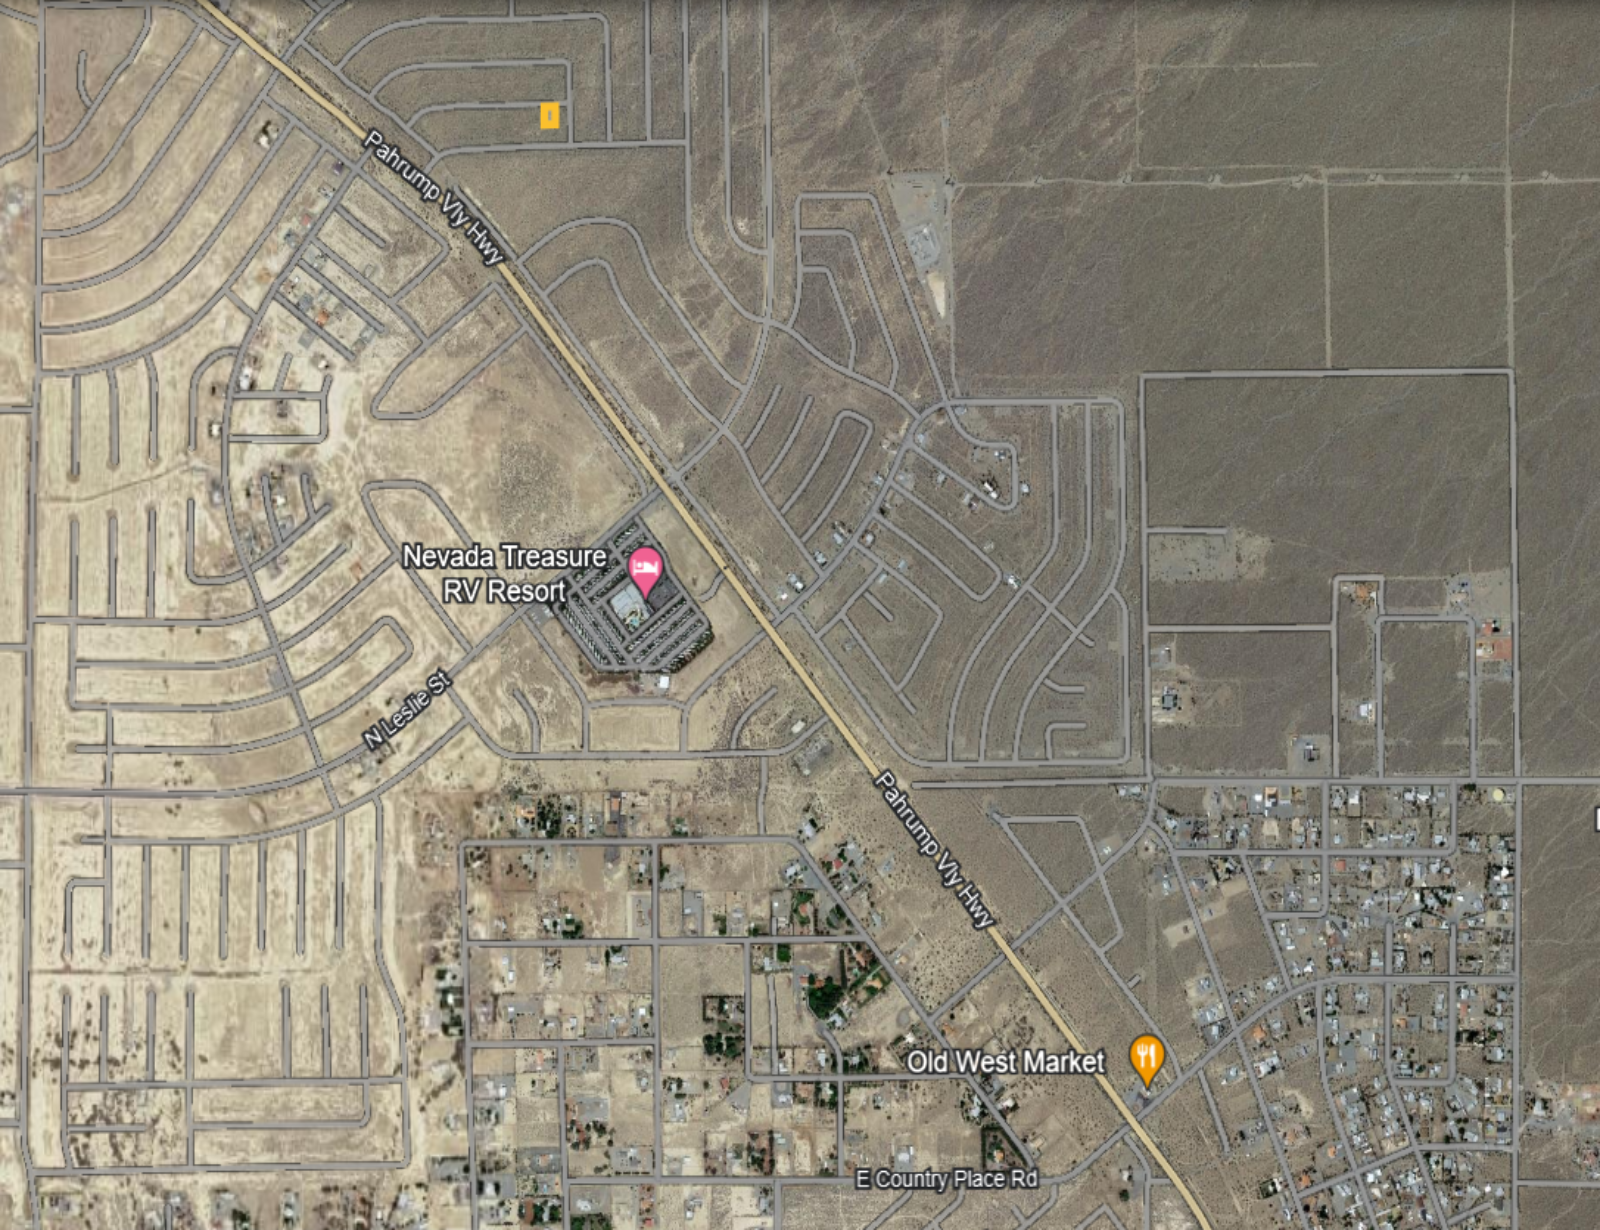 *NEW* NYE COUNTY, NEVADA RESIDENTIAL LOT NEAR HWY 160!! LOW MONTHLY PAYMENTS OF $110.00 321 Wilwood St., Pahrump, NV 89041 APN: 030-073-02 - Get Land Today